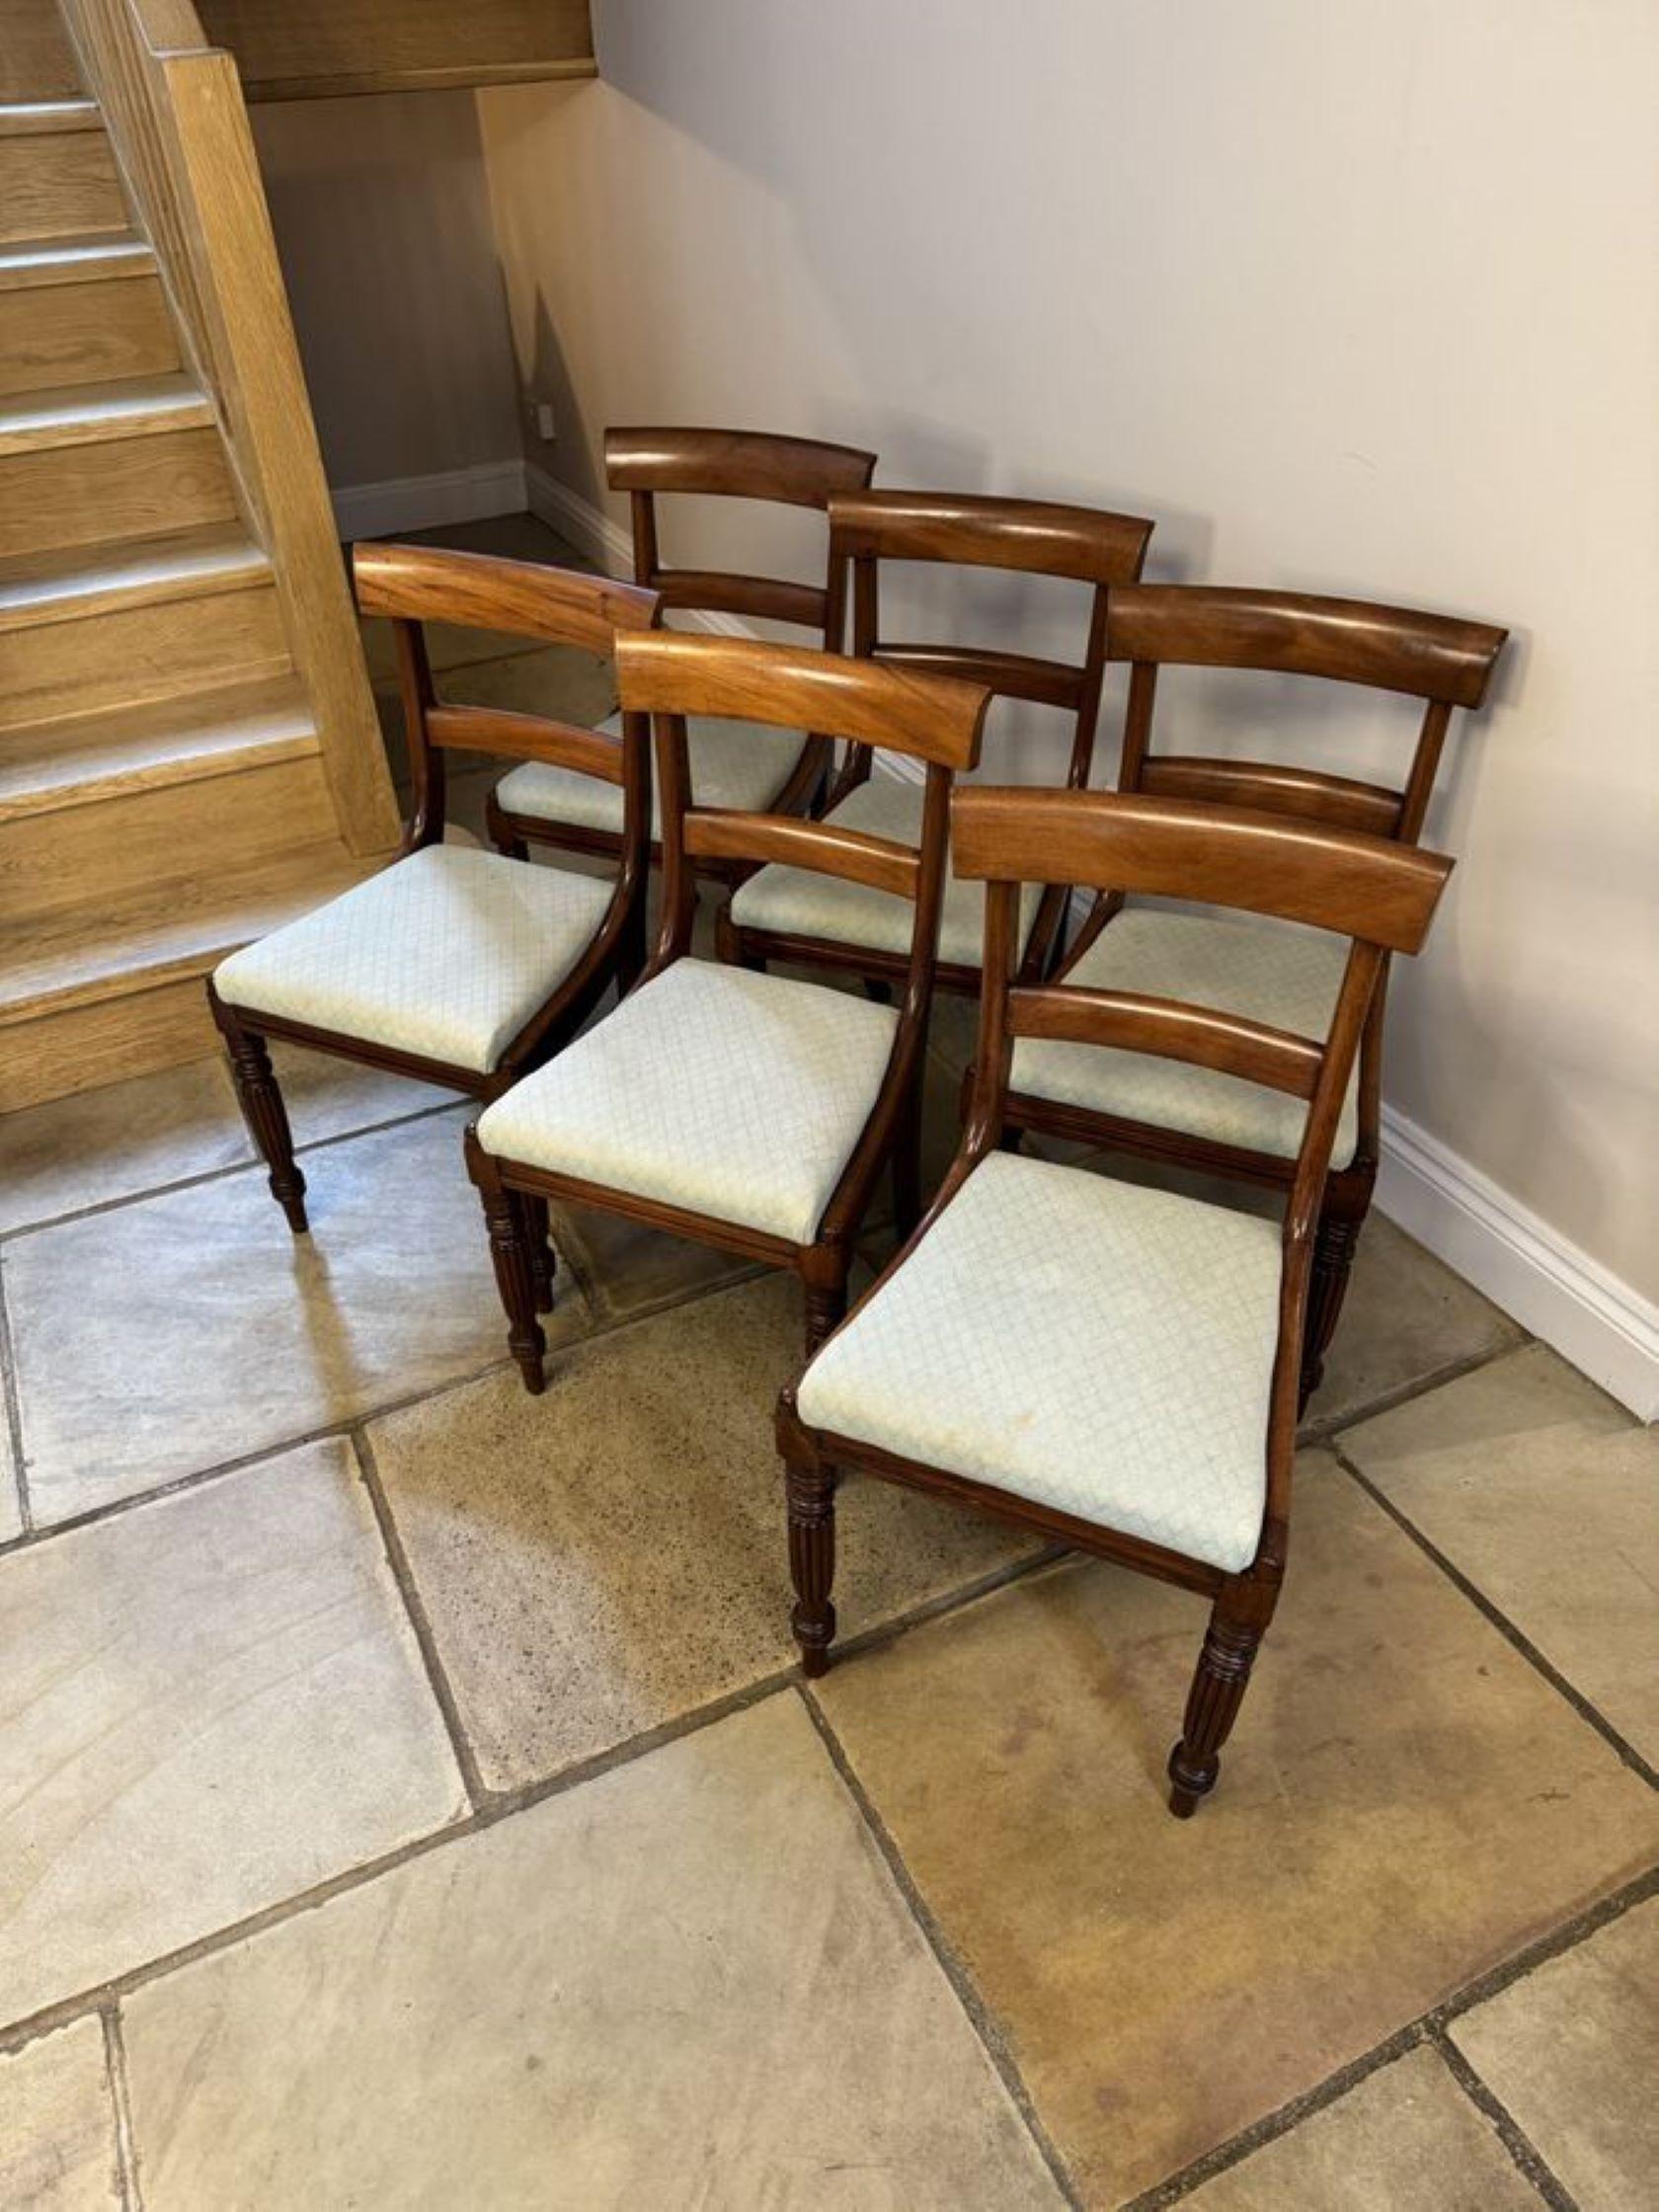 Quality set of six antique Regency mahogany dining chairs, having a quality figured mahogany bar back drop in seats, standing on elegant reeded tapering legs to the front and out swept legs to the back.

D. 1830